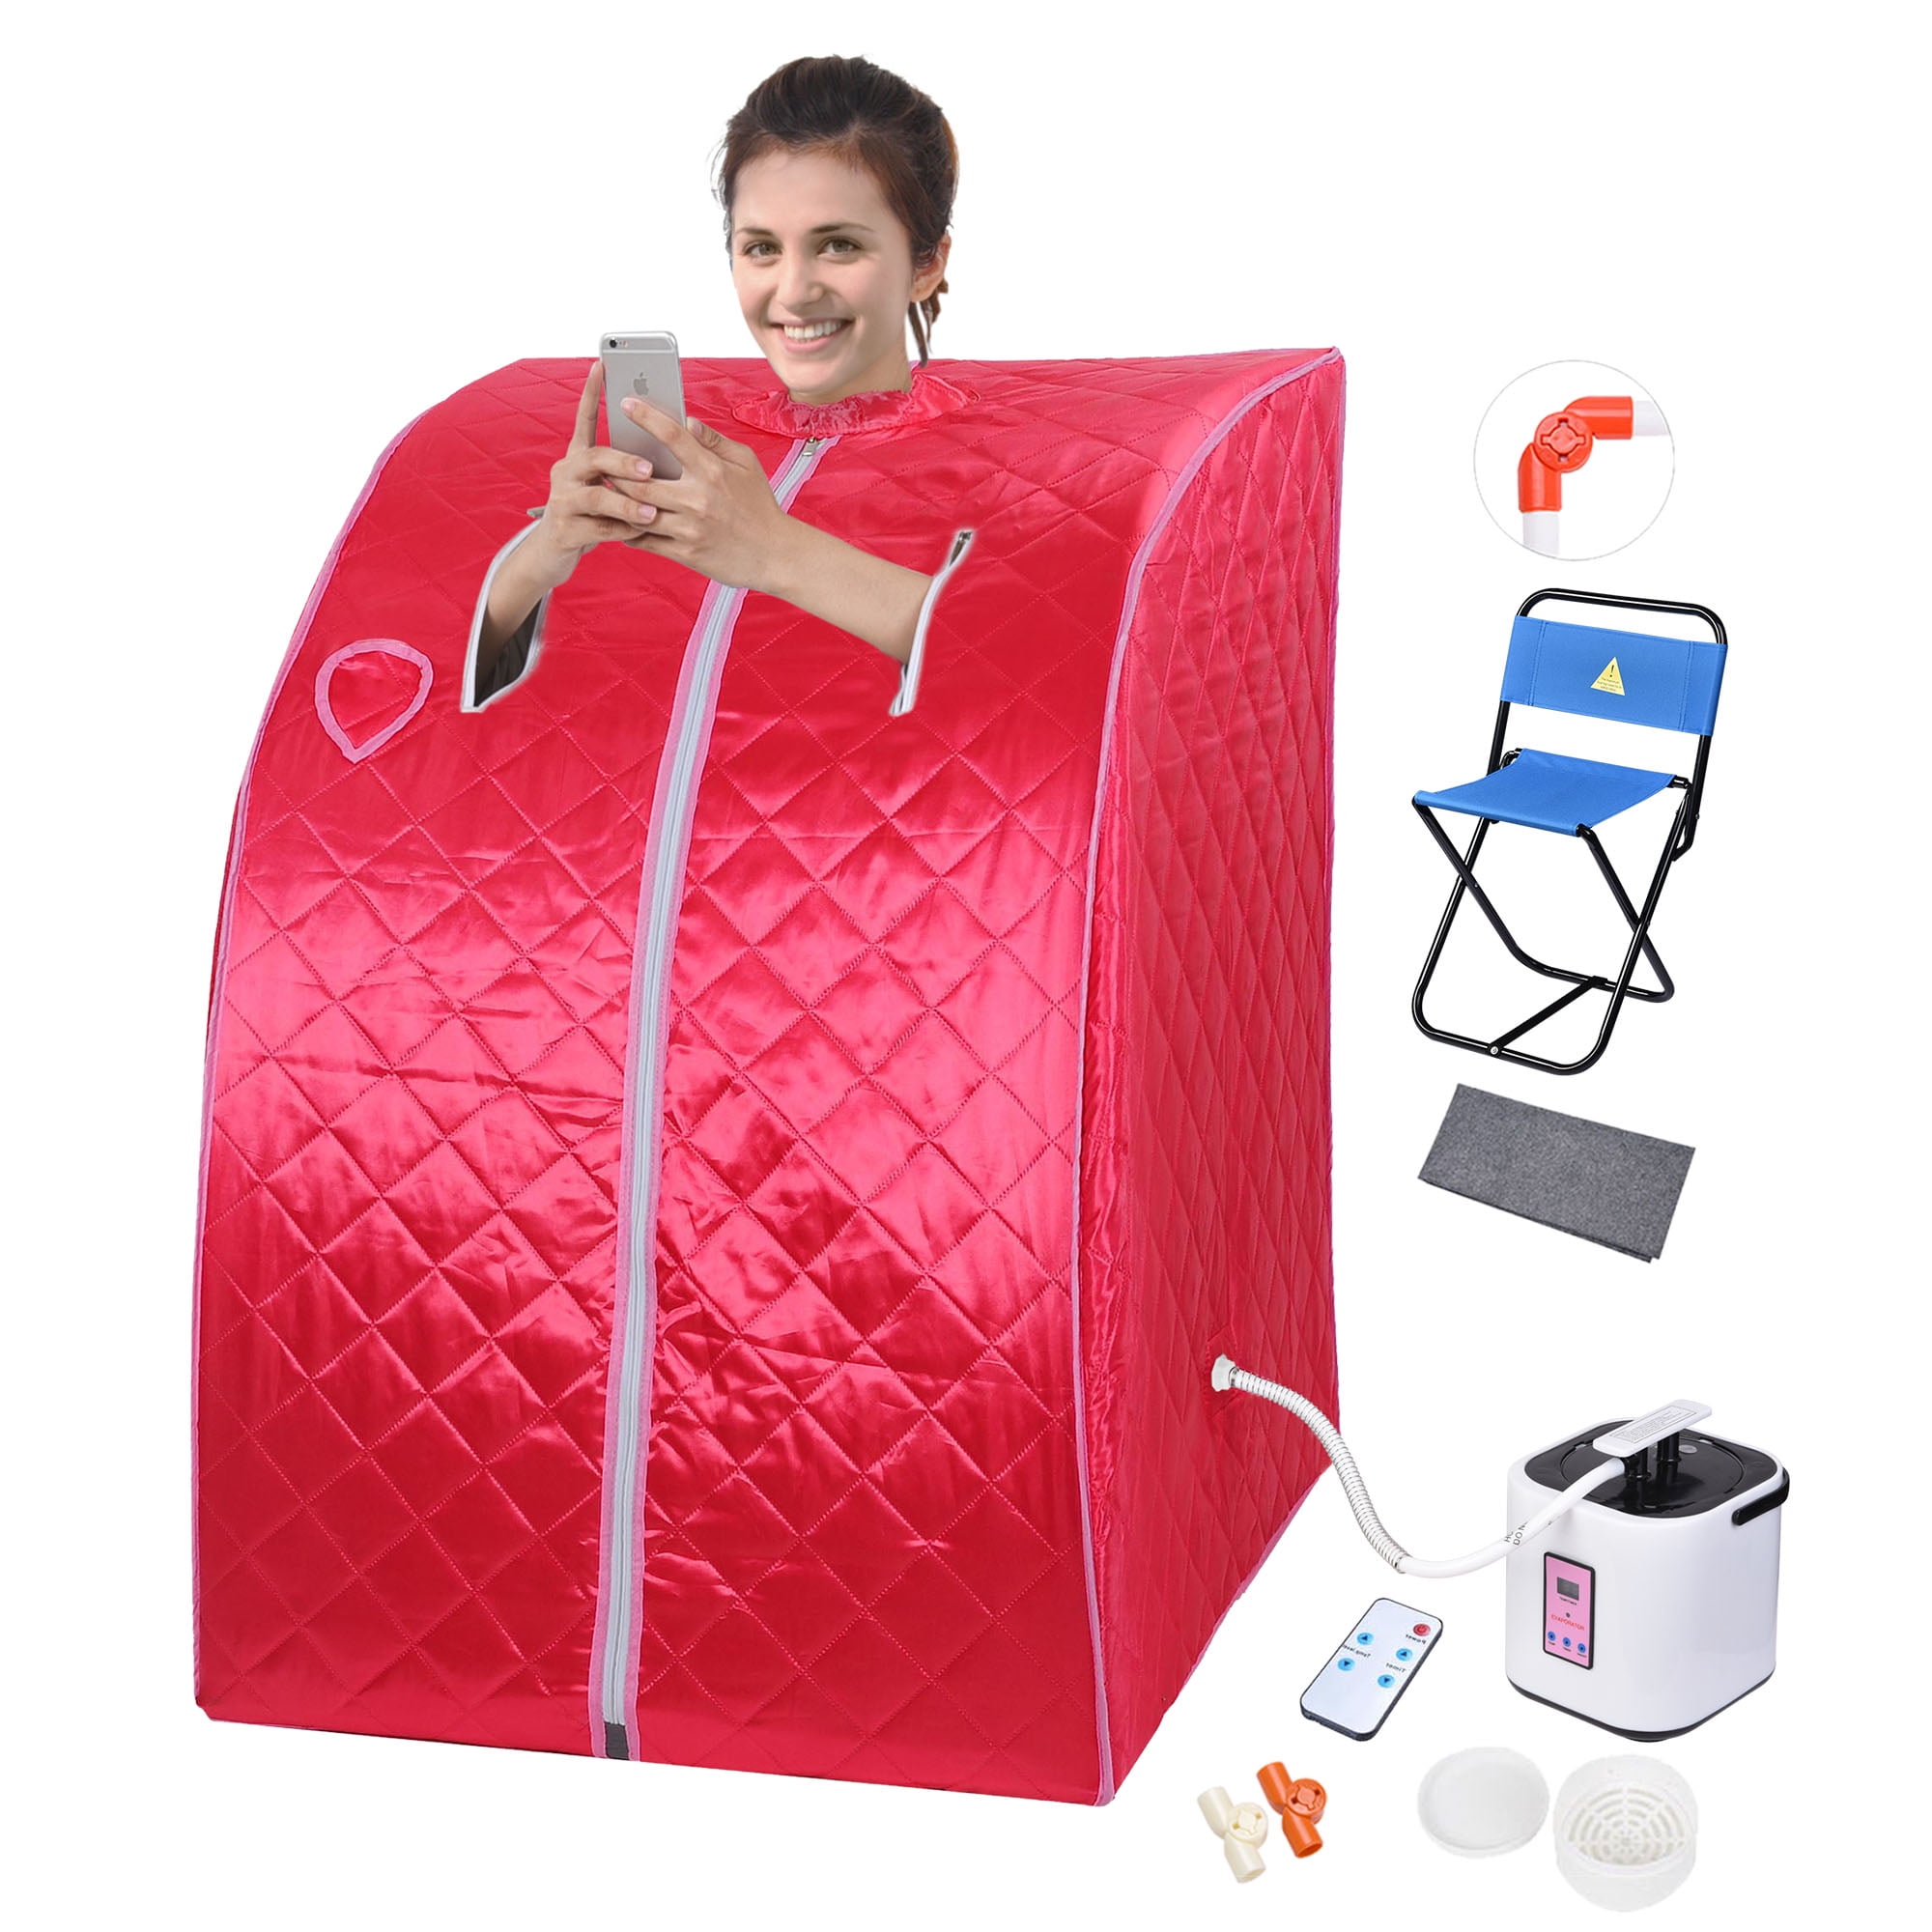 #3 Jarchii Home Spa Steam Sauna 2L Home Personal Spa Steam Sauna Tent With Tent Tube Contorller Portable Tent Large Room Suitable for Crowds In Different Weight